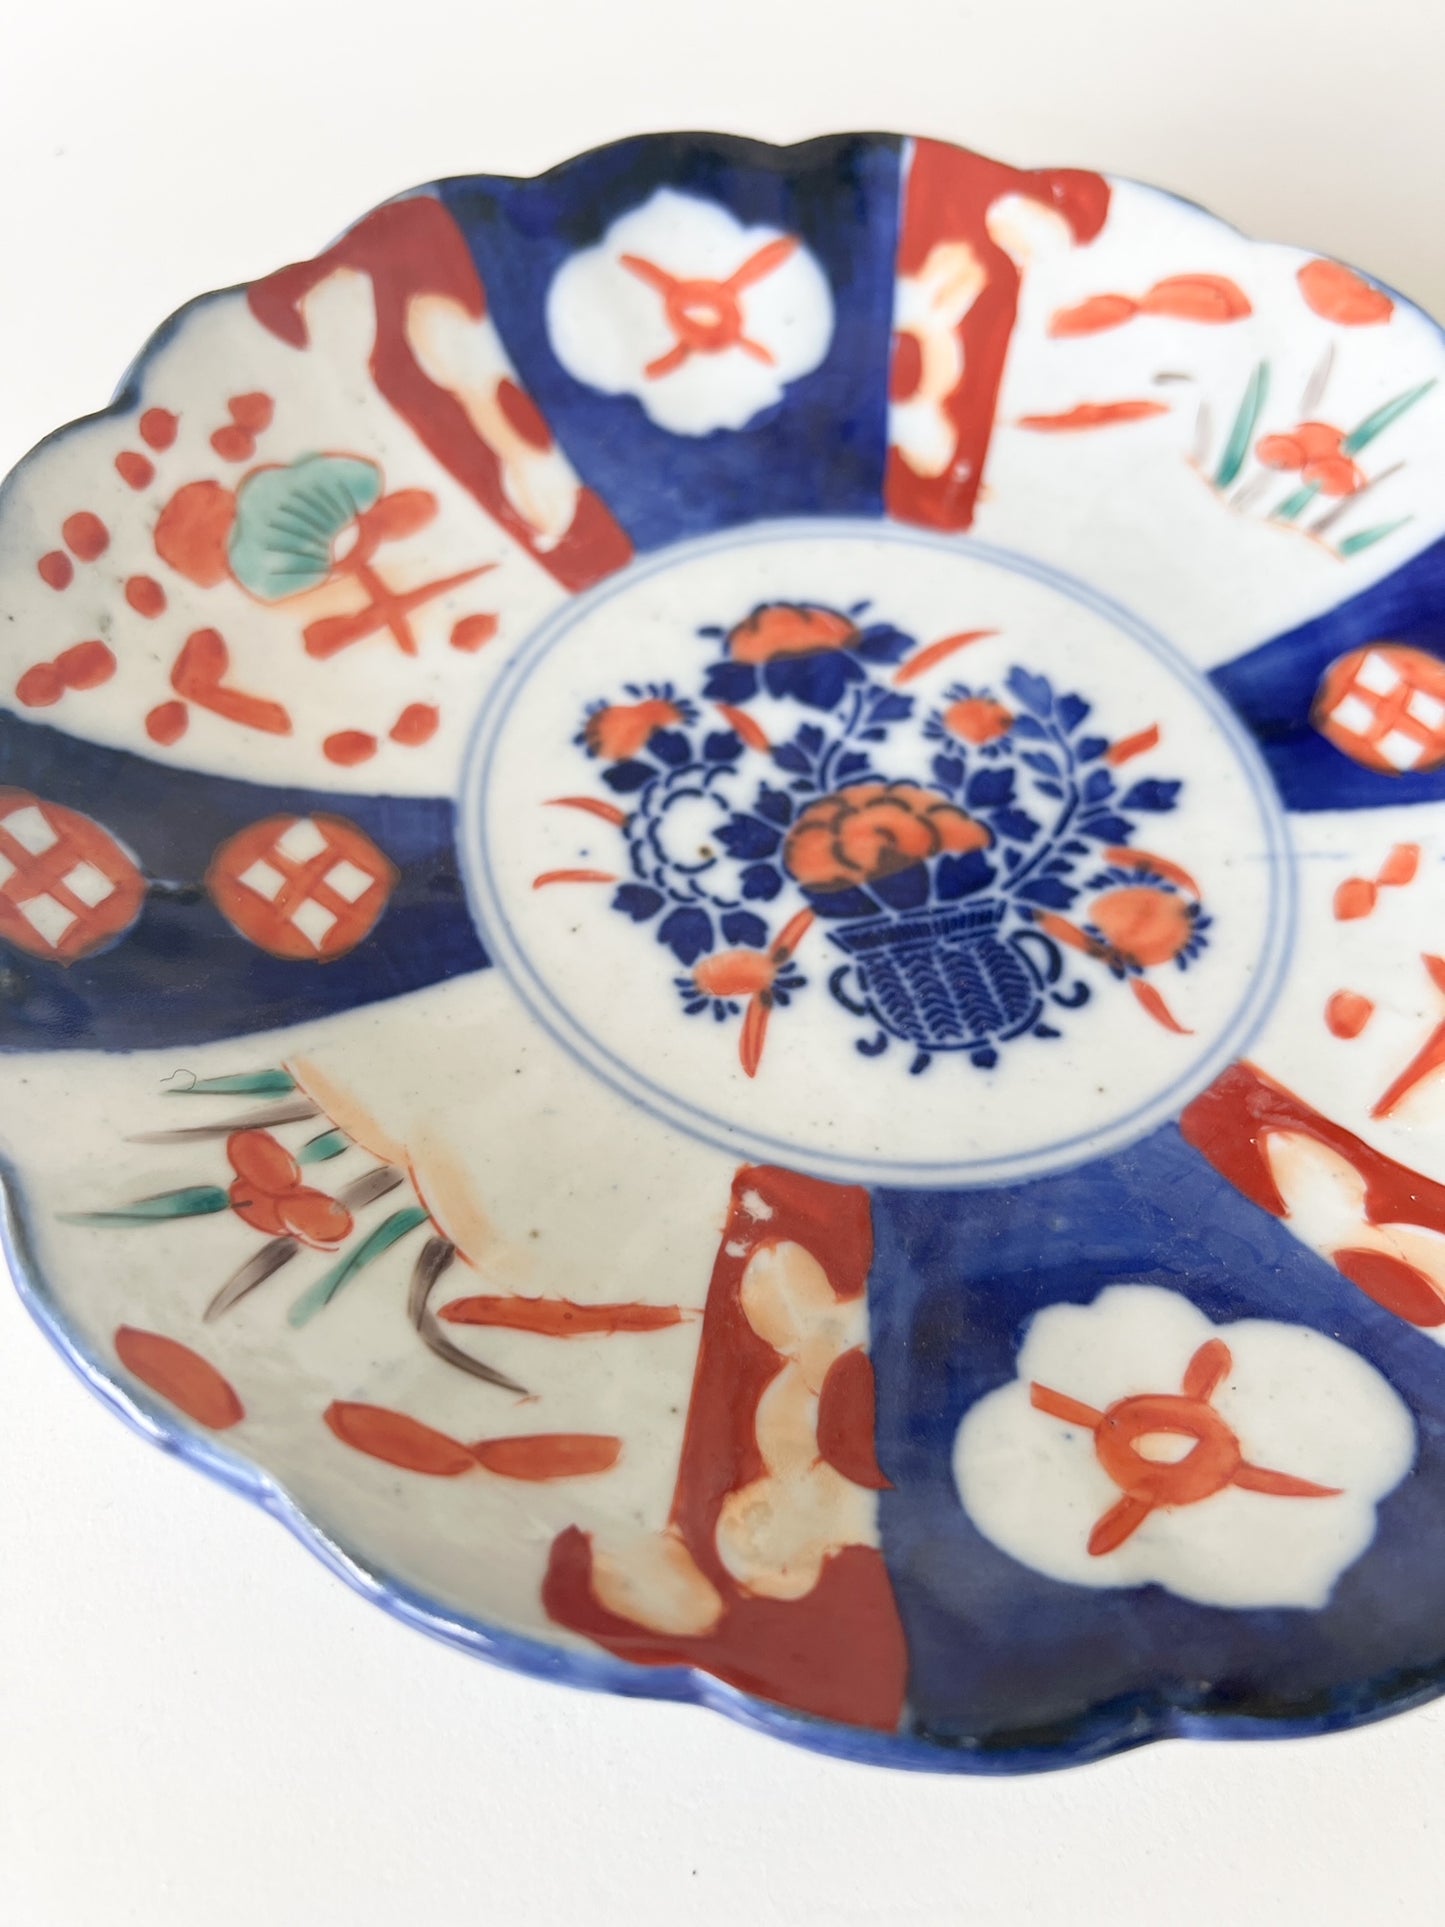 Close-up of a plate featuring a red, white, and blue design. he plate's rim is scalloped and painted a dark blue